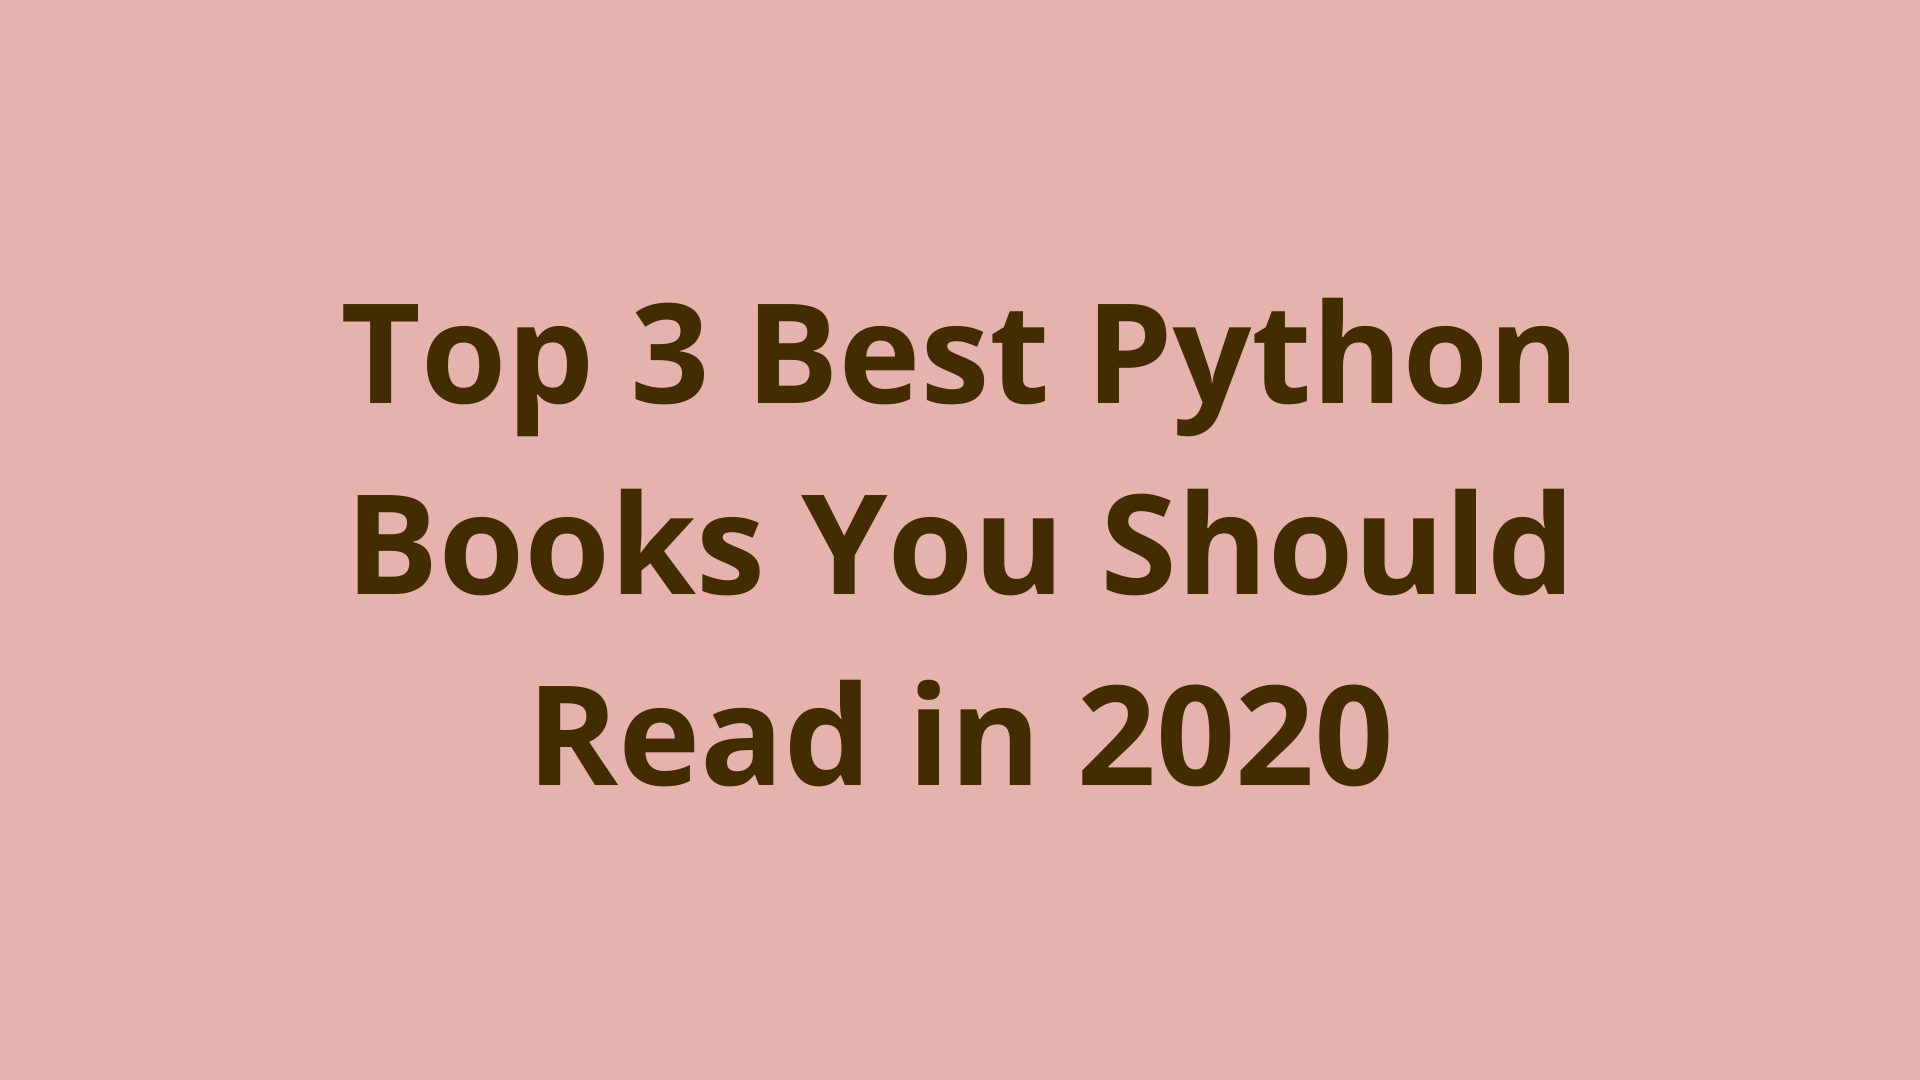 Image of Top 3 best Python books you should read in 2020